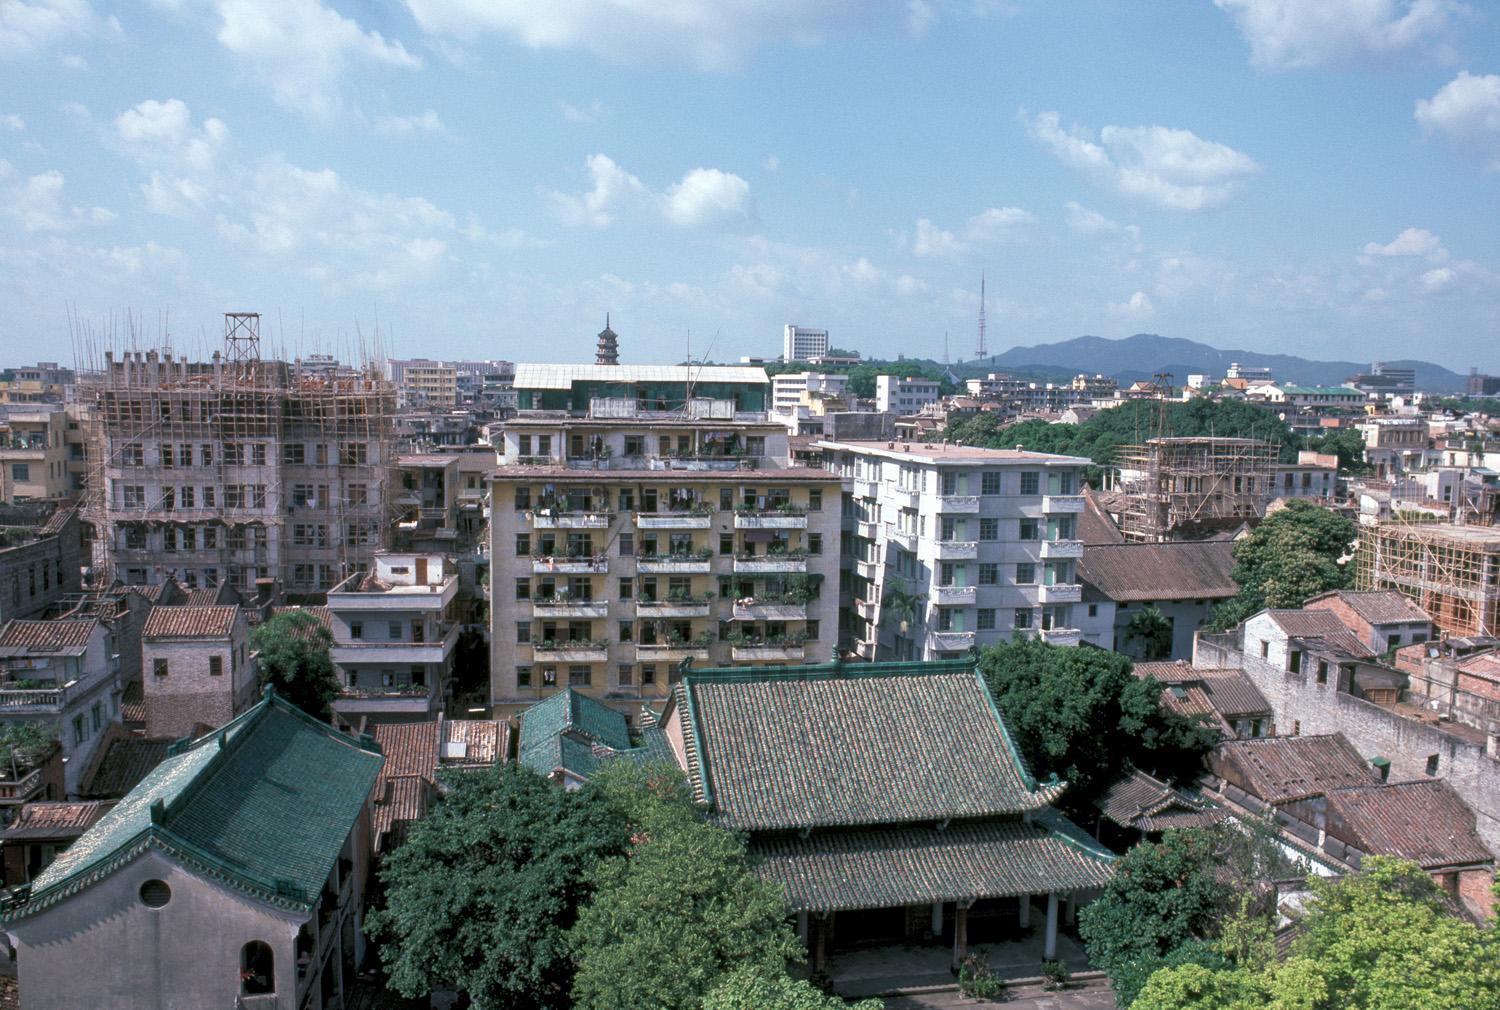 Elevated view of prayer hall among apartment buildings, looking north